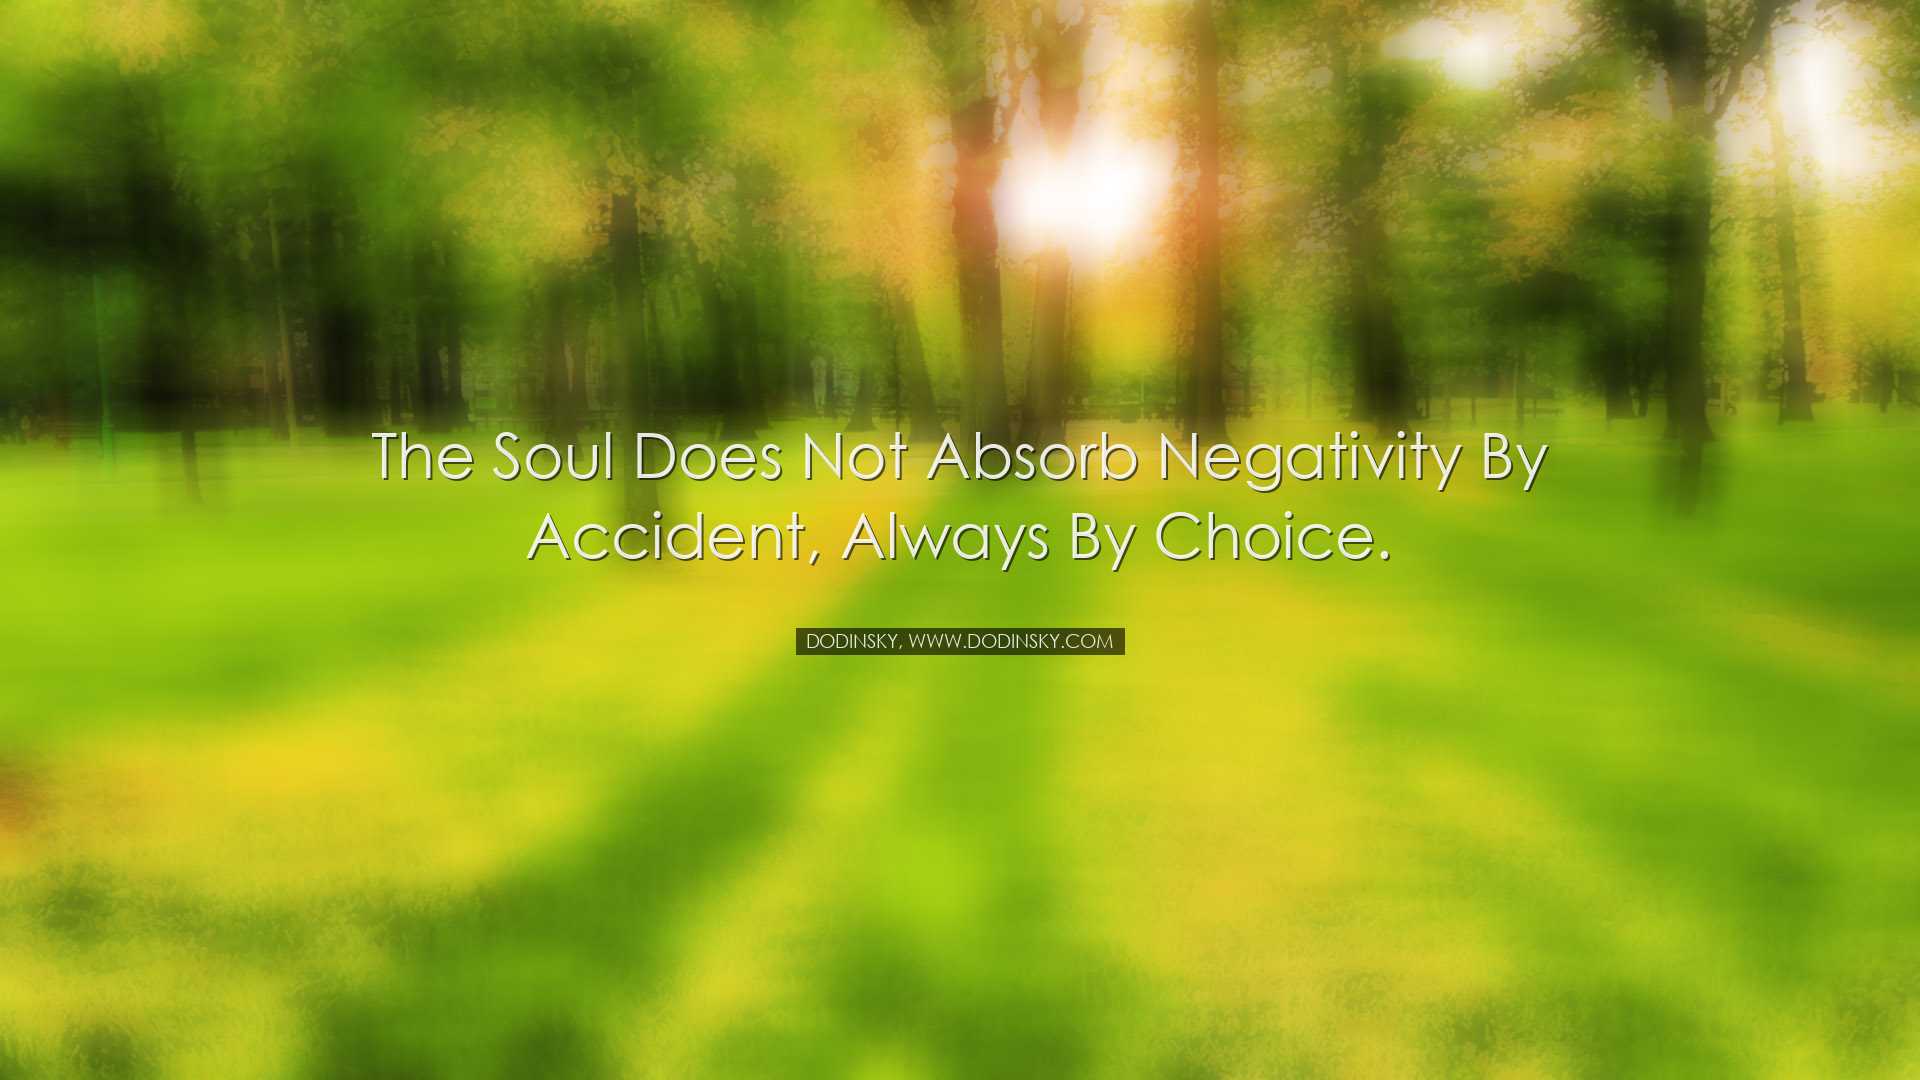 The soul does not absorb negativity by accident, always by choice.